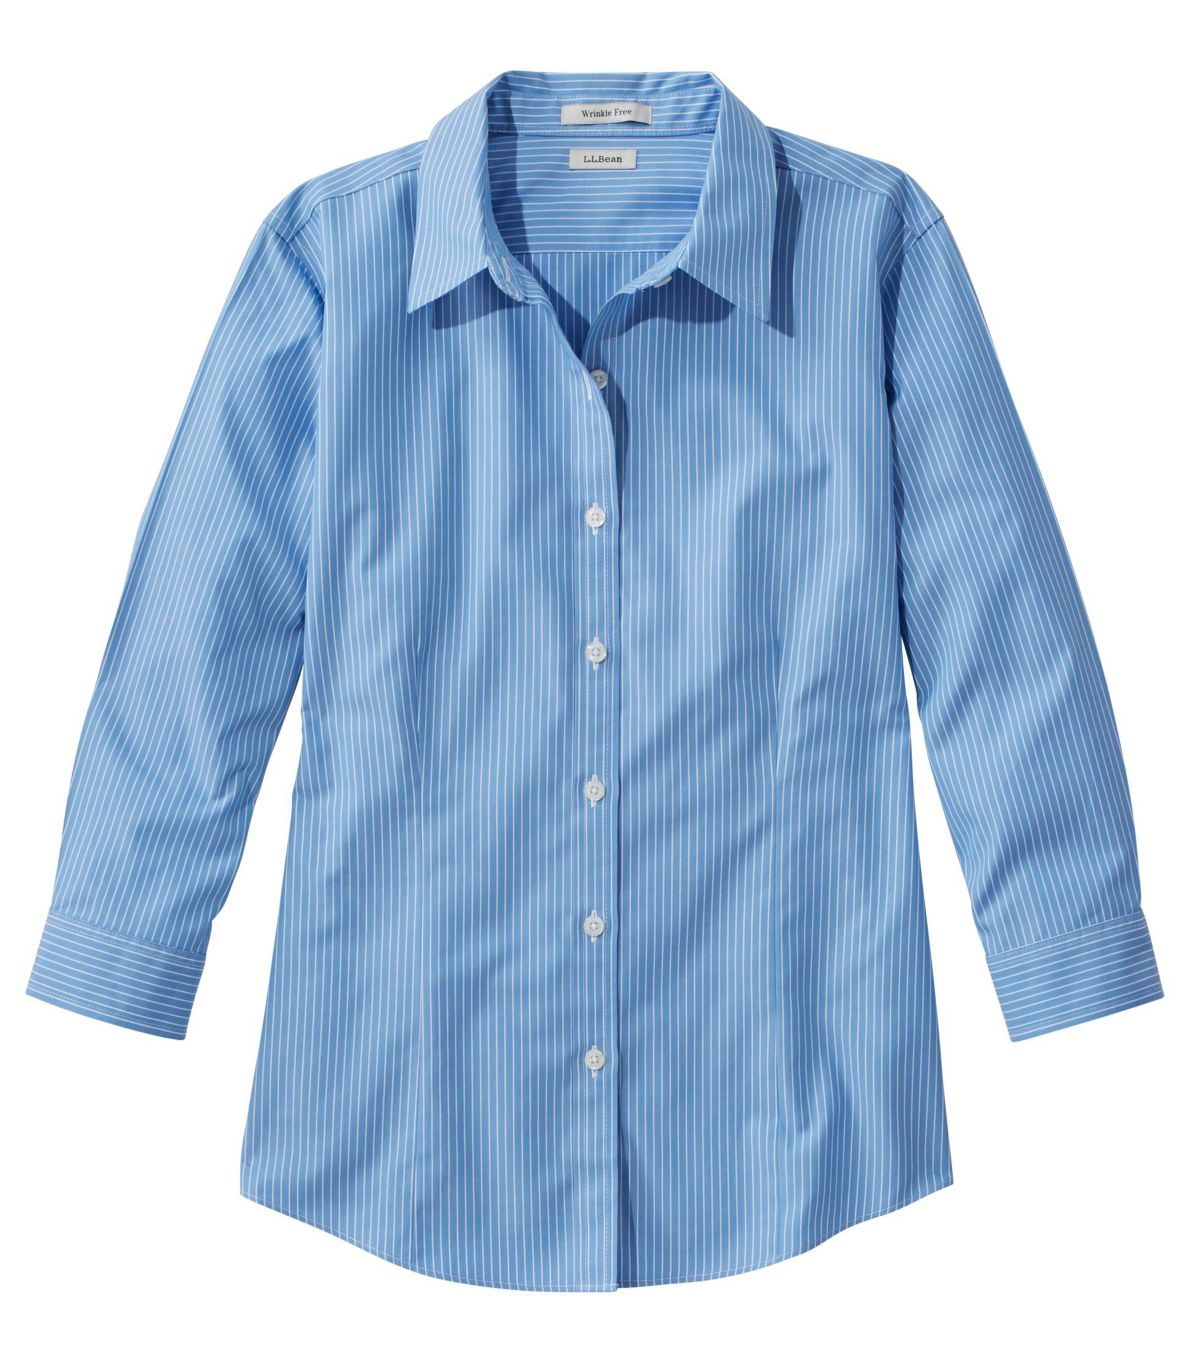 Women's Wrinkle-Free Pinpoint Oxford Shirt, Three-Quarter Sleeve Slightly Fitted Stripe